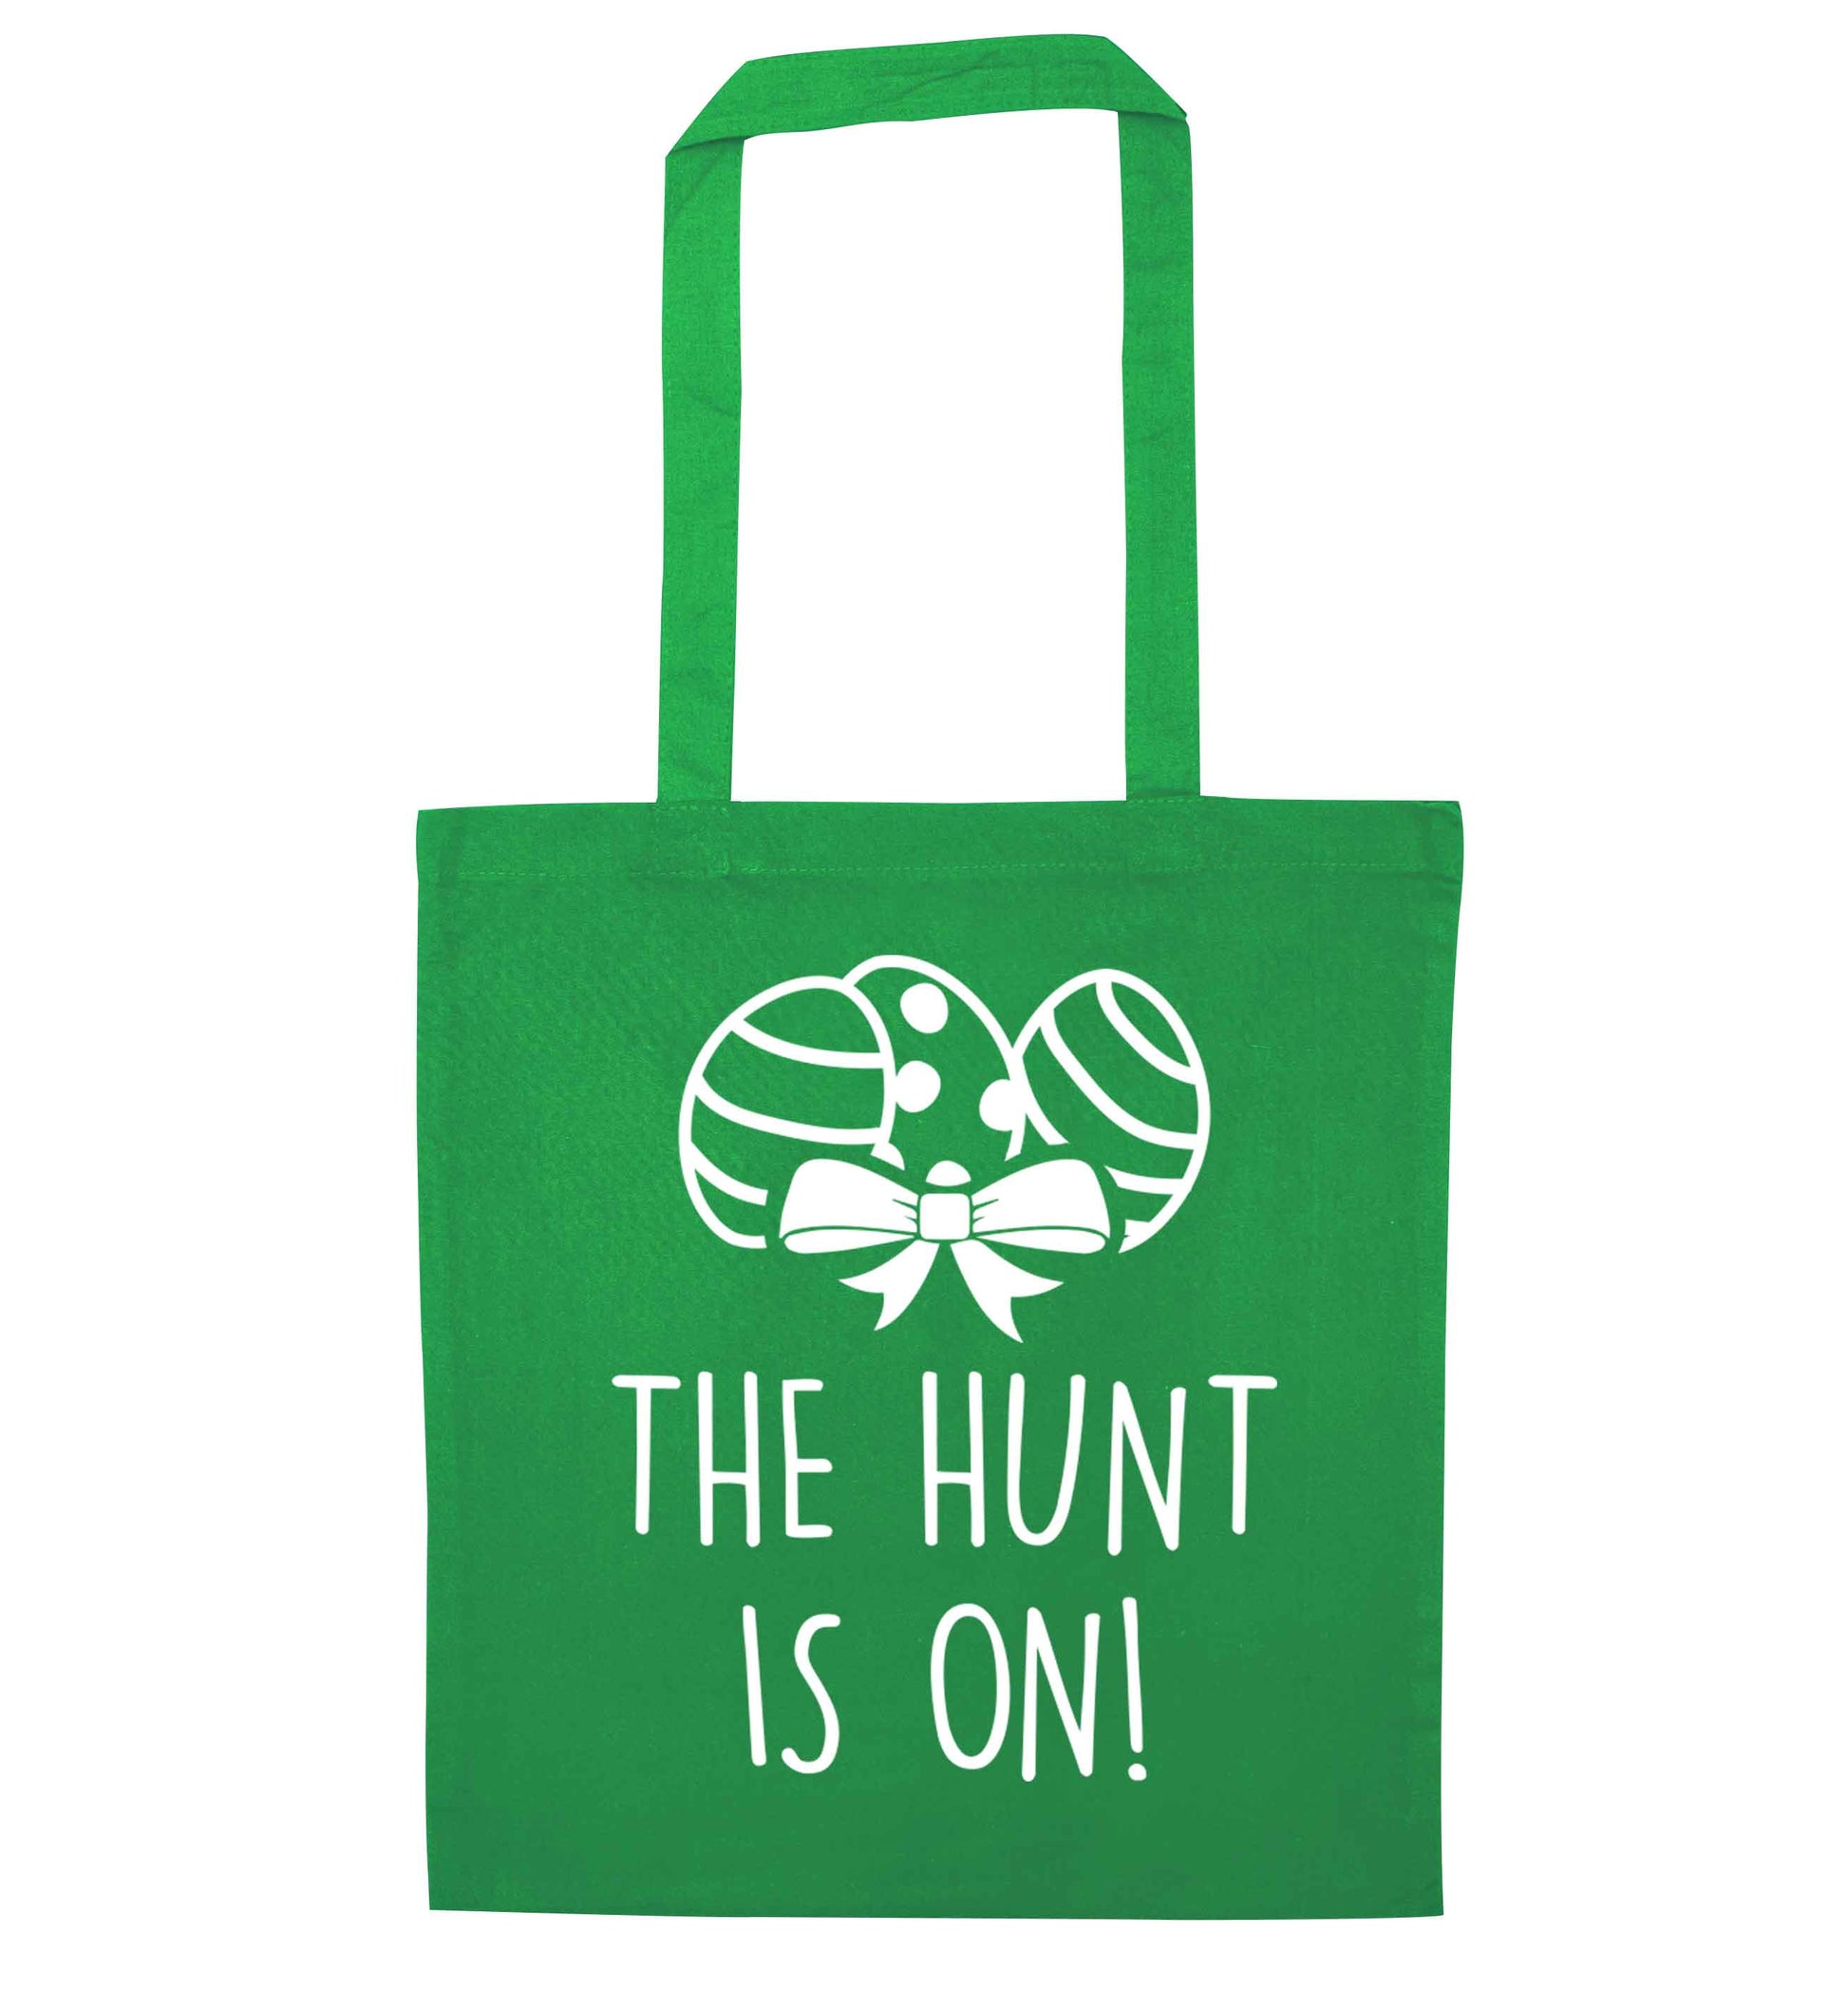 The hunt is on green tote bag